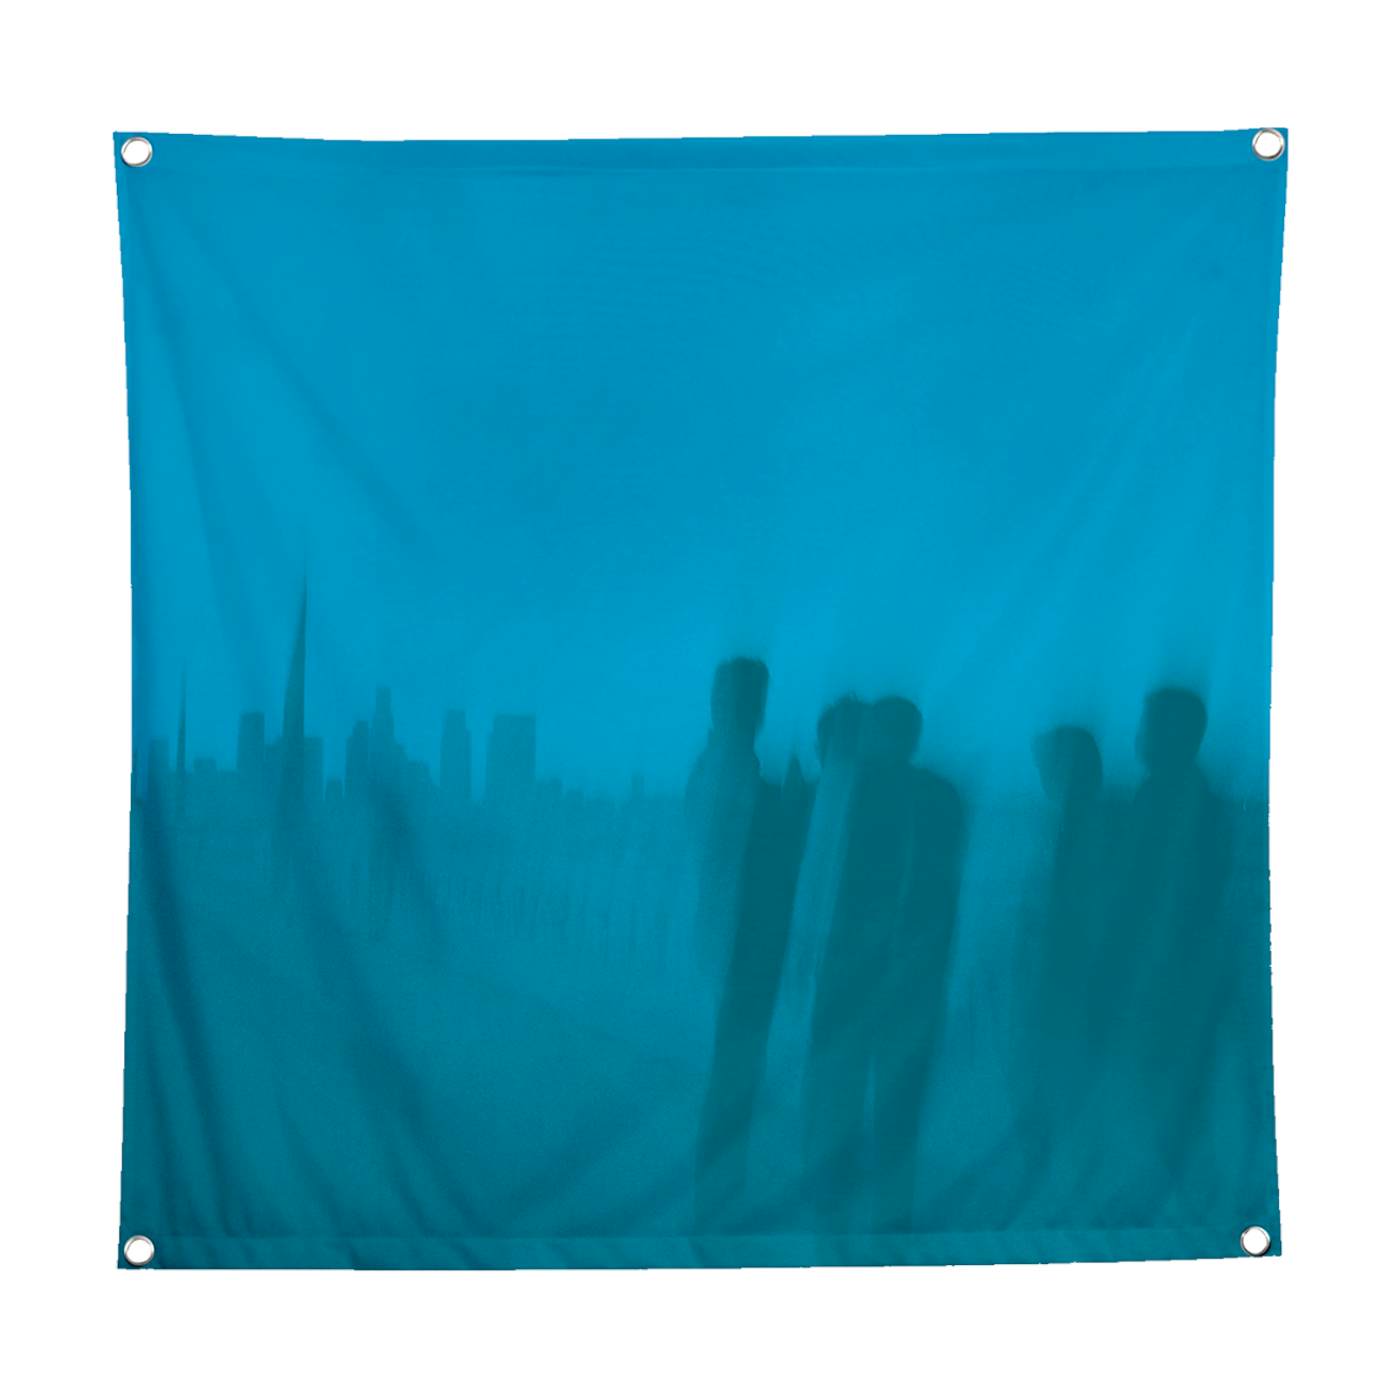 Touché Amoré "Is Survived By" Flag